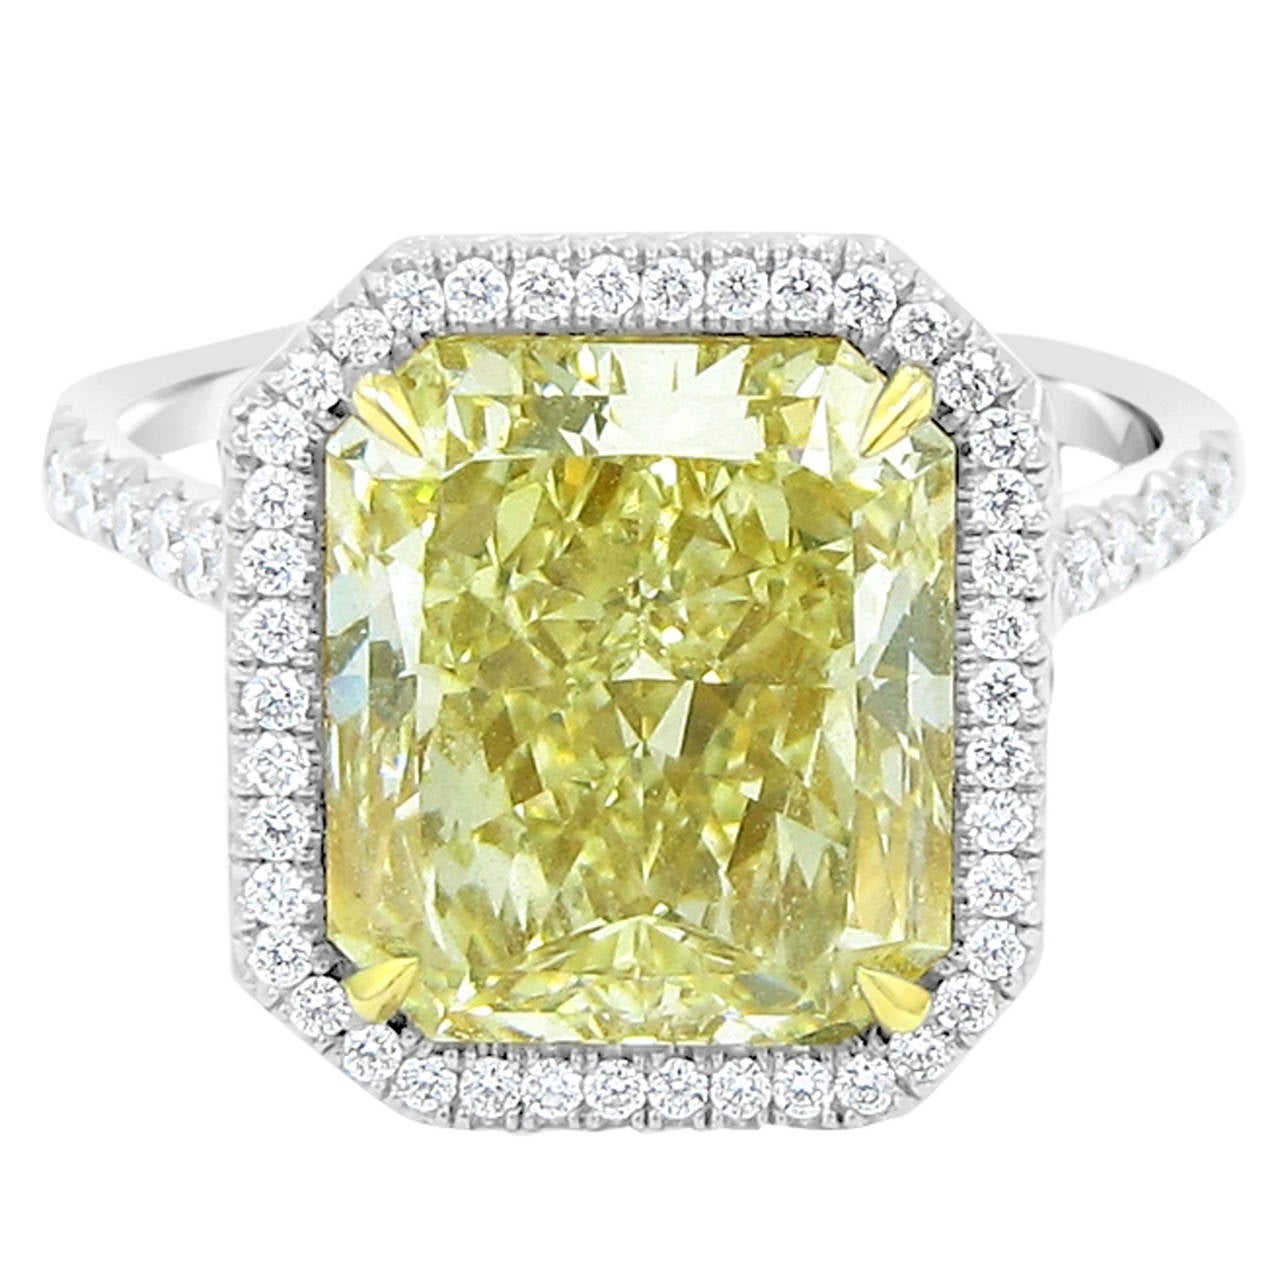 GIA Certified 6.25 Carat Fancy Yellow Diamond Engagement Ring For Sale